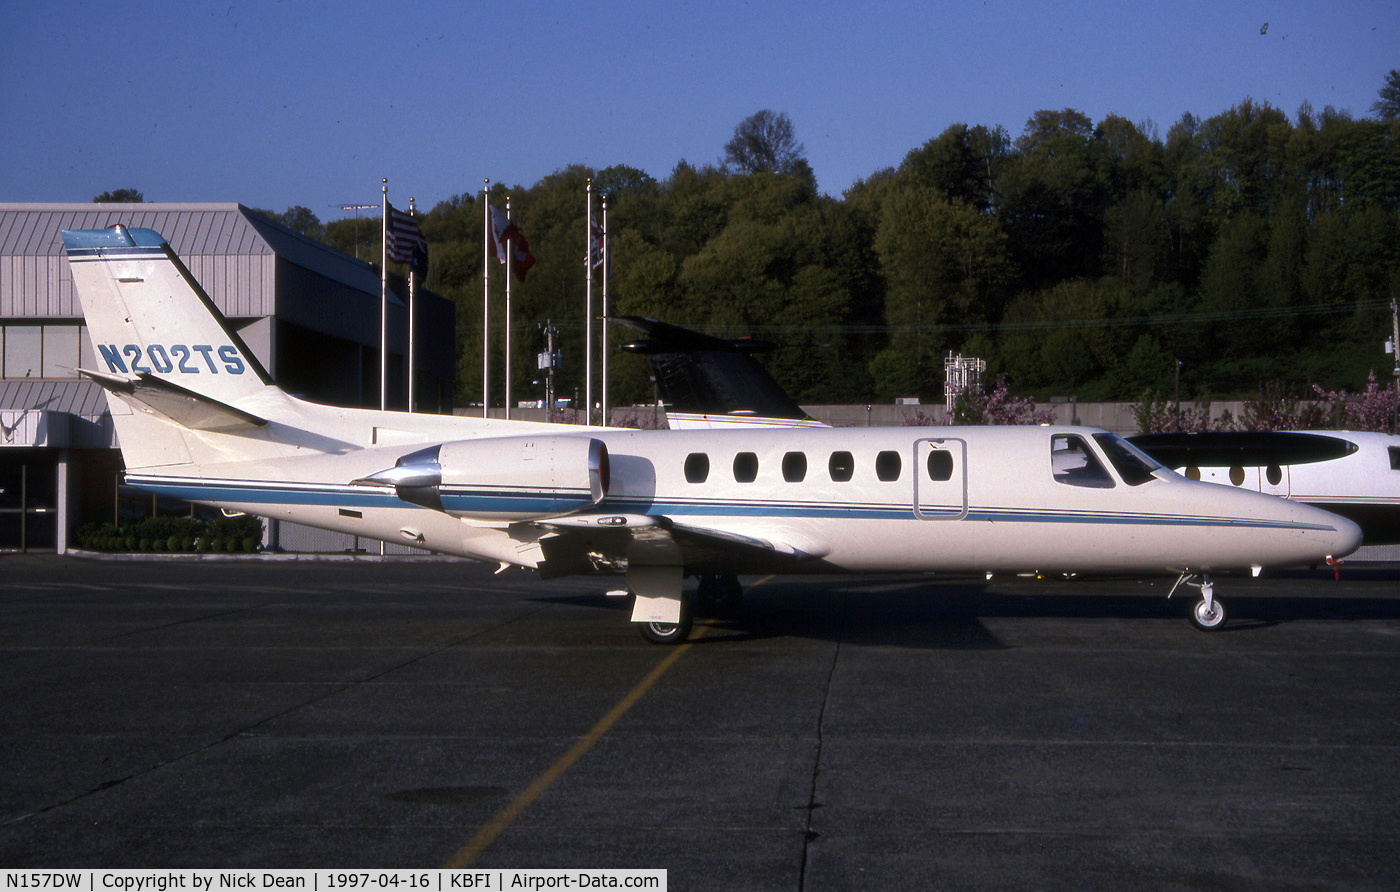 N157DW, 1981 Cessna 550 Citation II C/N 550-0253, KBFI (Seen here as N202TS this airframe is currently registered N157DW as posted)